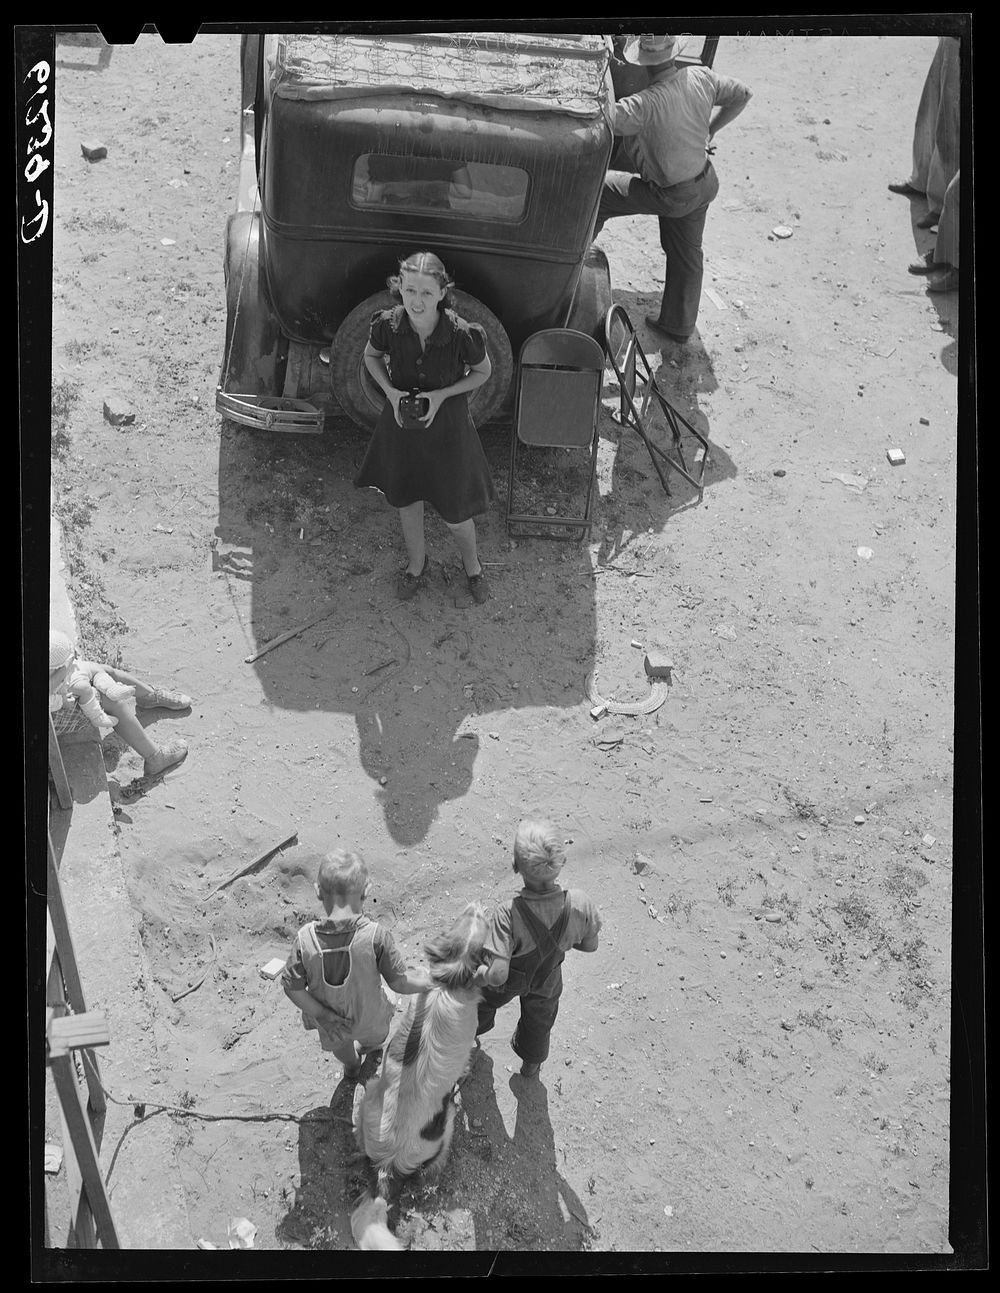 [Untitled photo, possibly related to: Loading household goods into cars and trailer. Two families getting ready to move on…